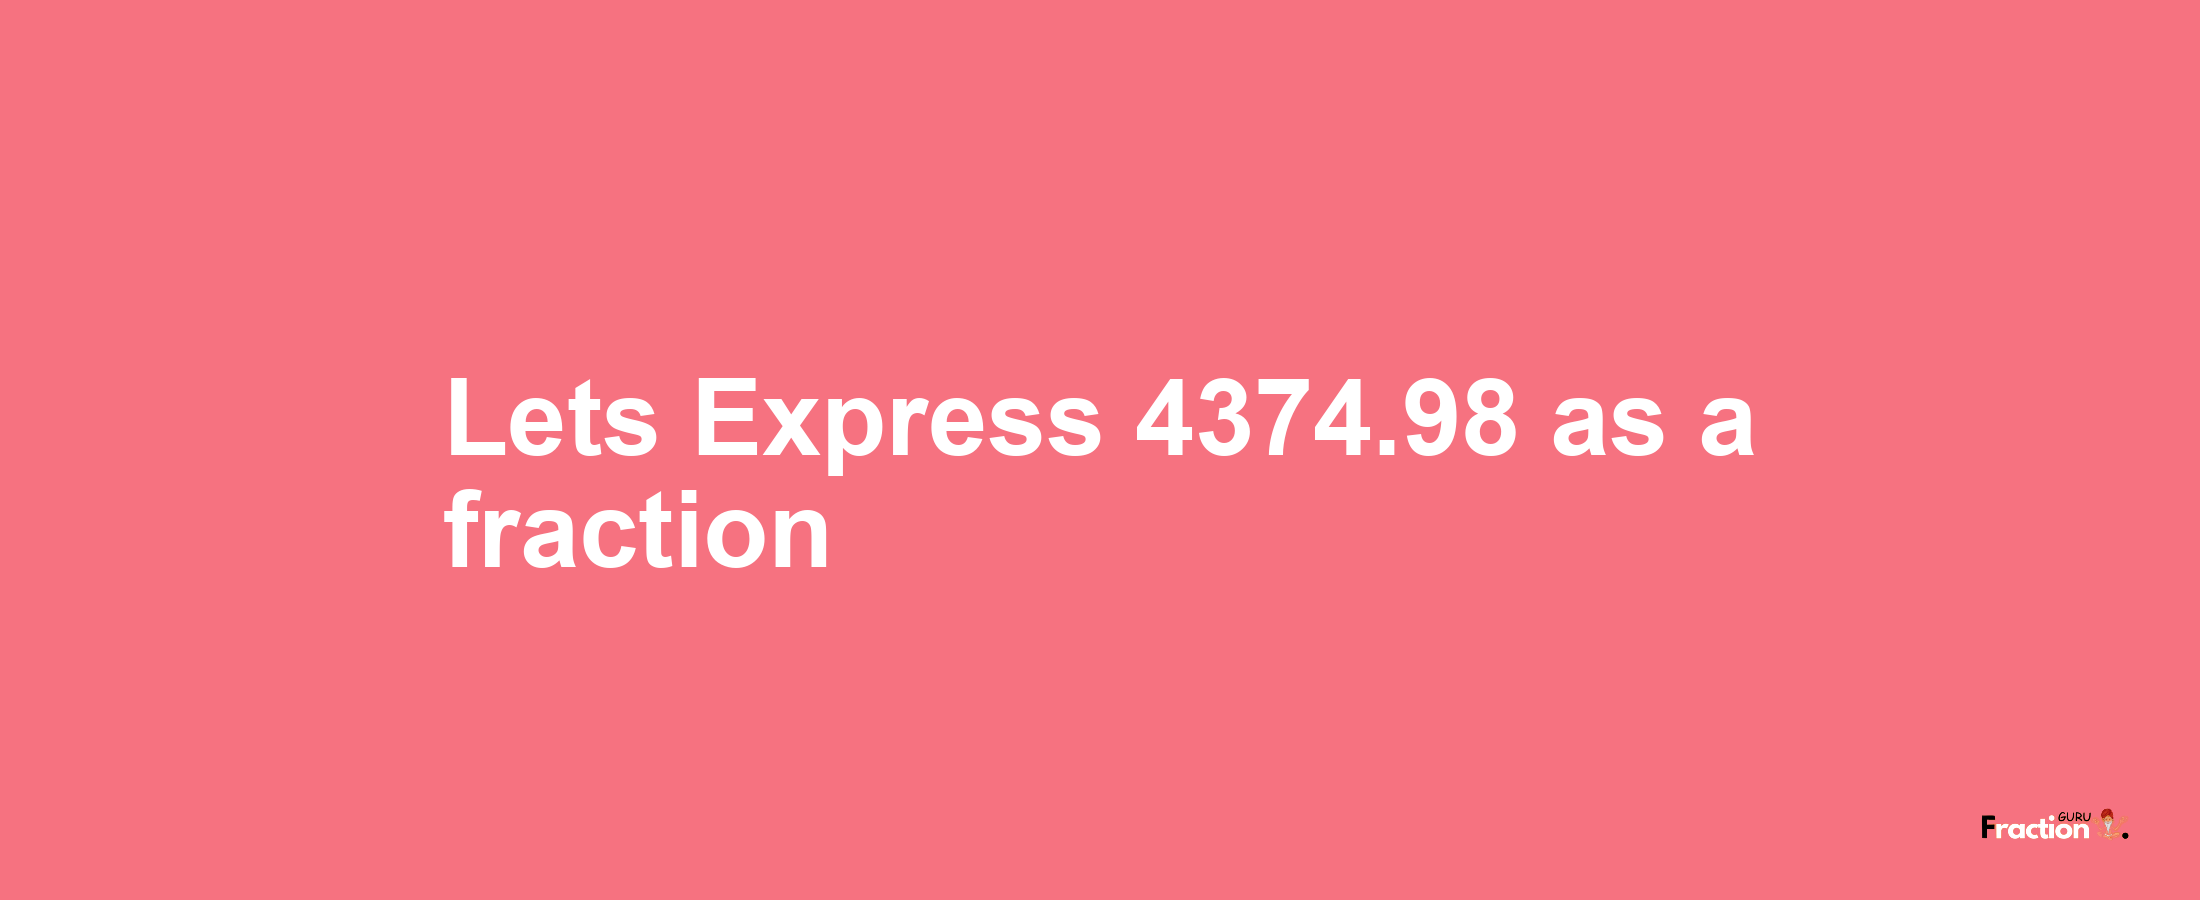 Lets Express 4374.98 as afraction